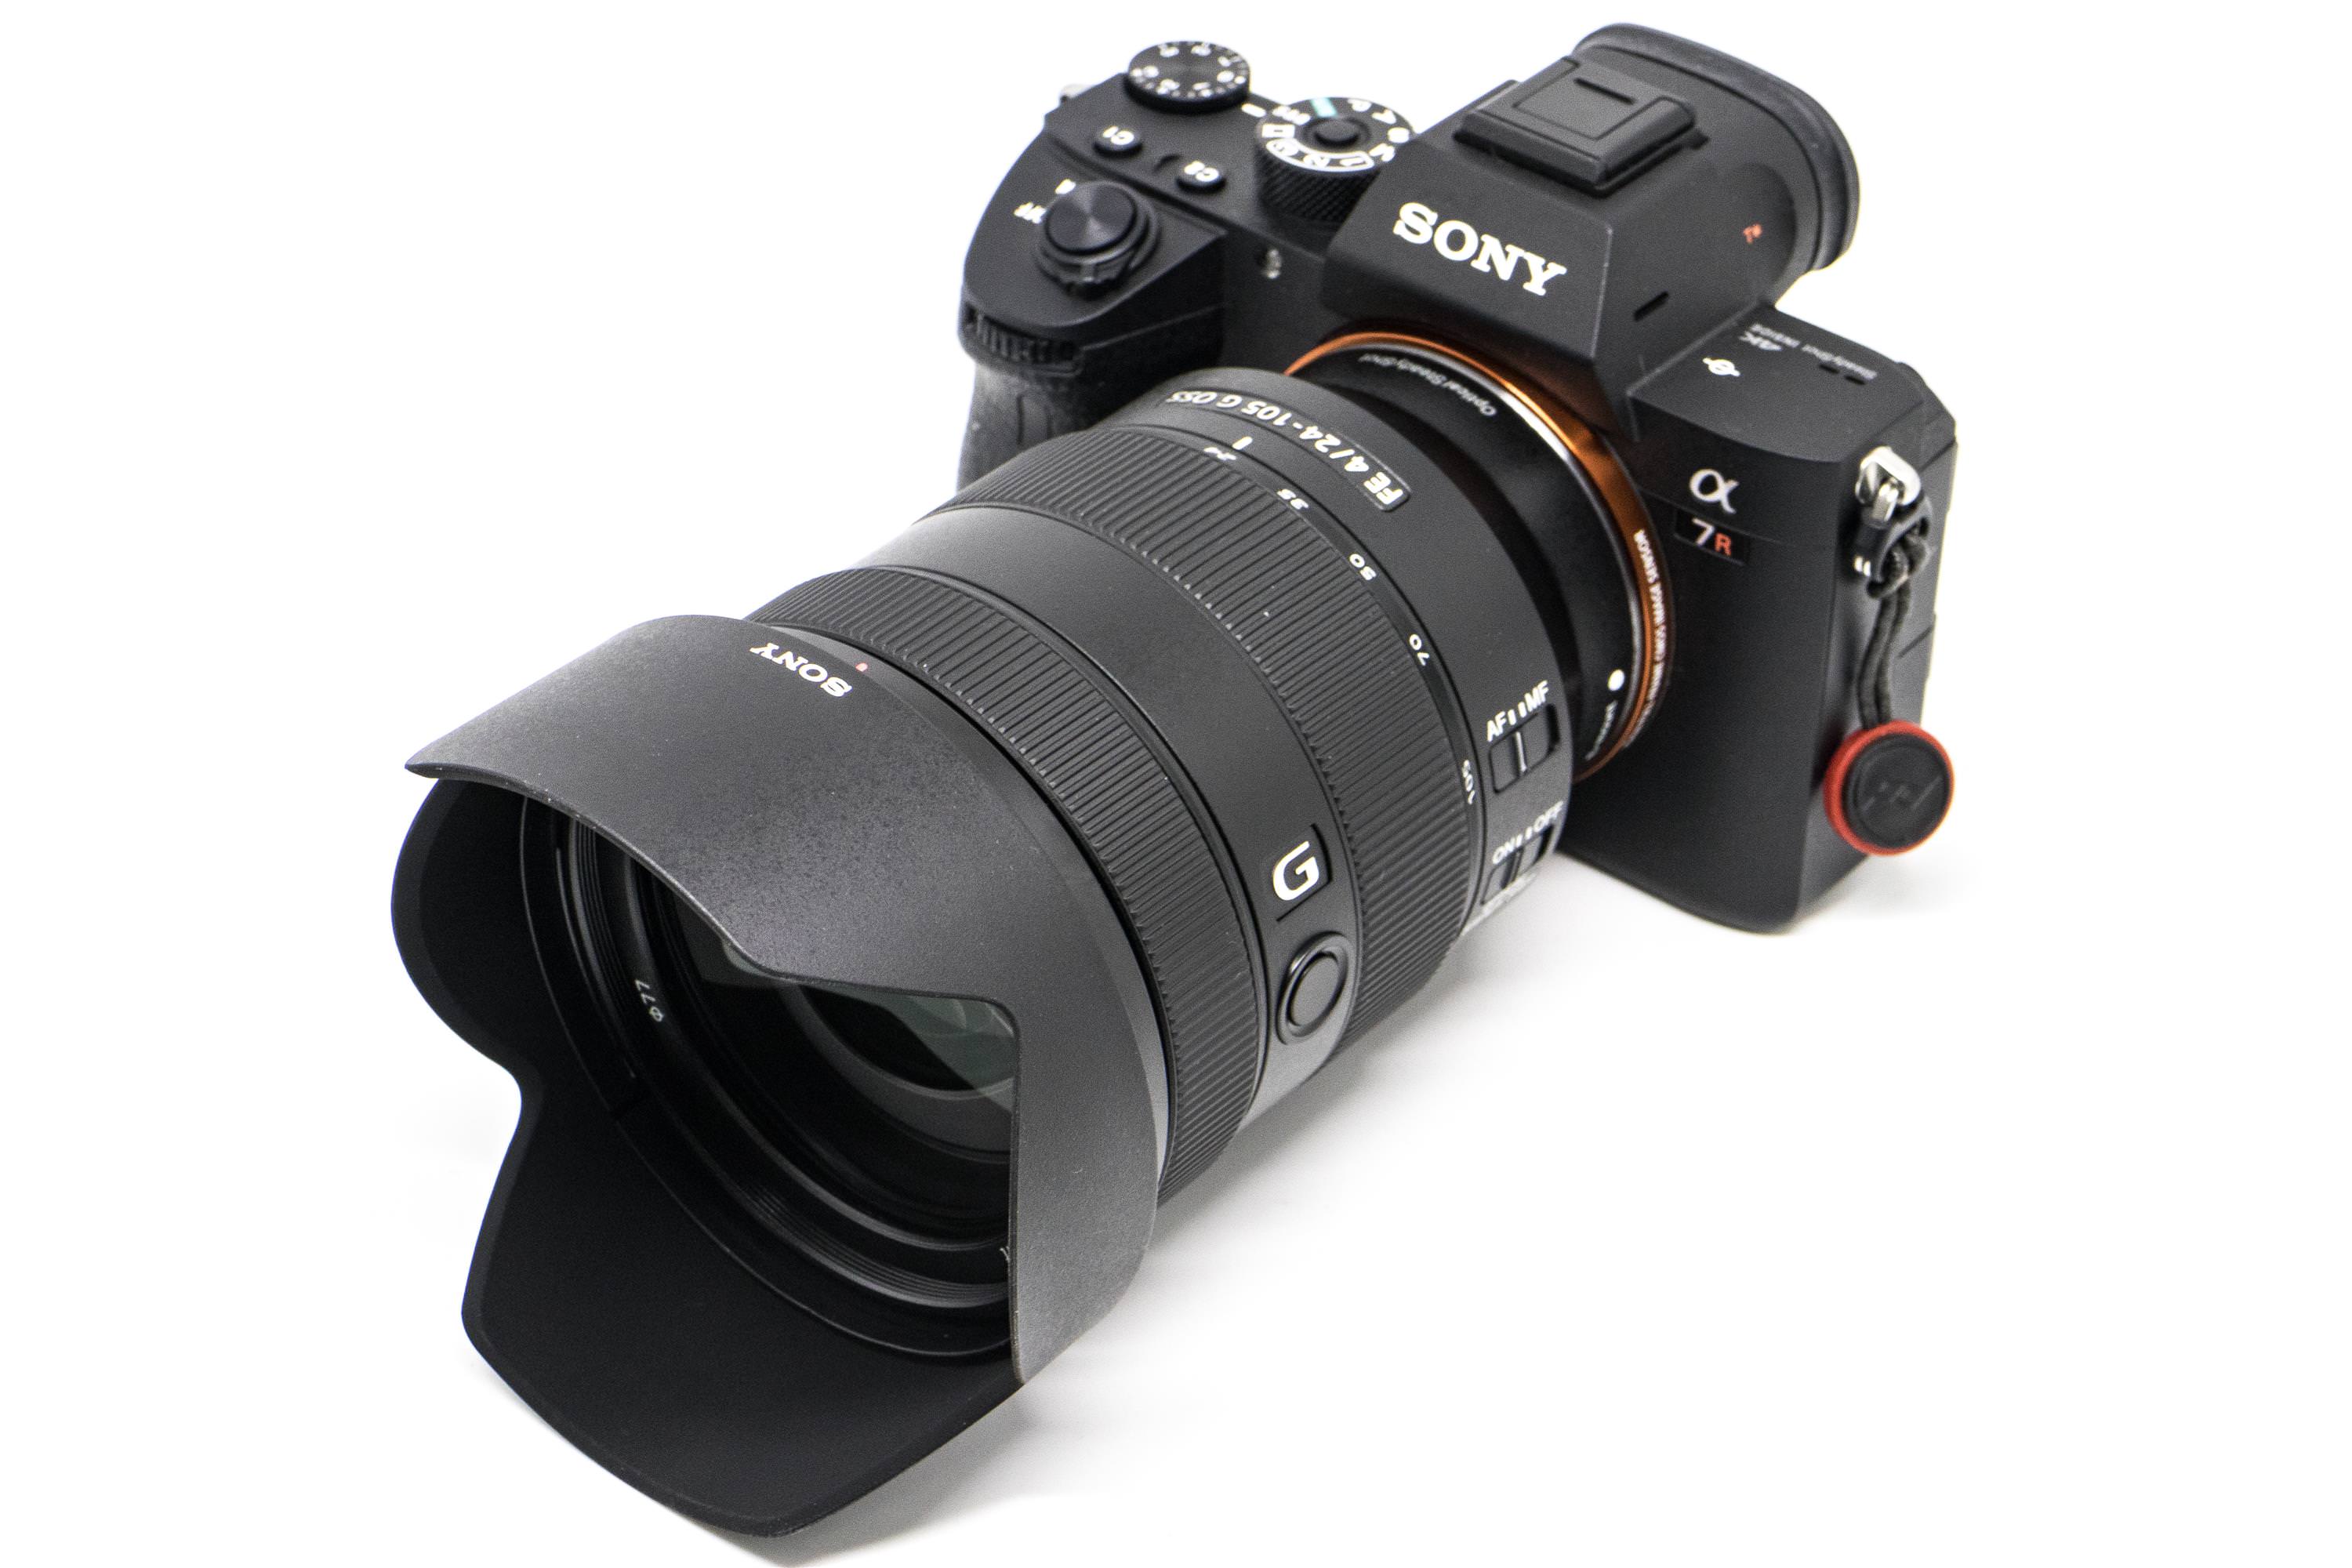 Sony FE 24-105mm F4 G OSS 開箱介紹, A7 / A9 最熱門實用標準變焦鏡